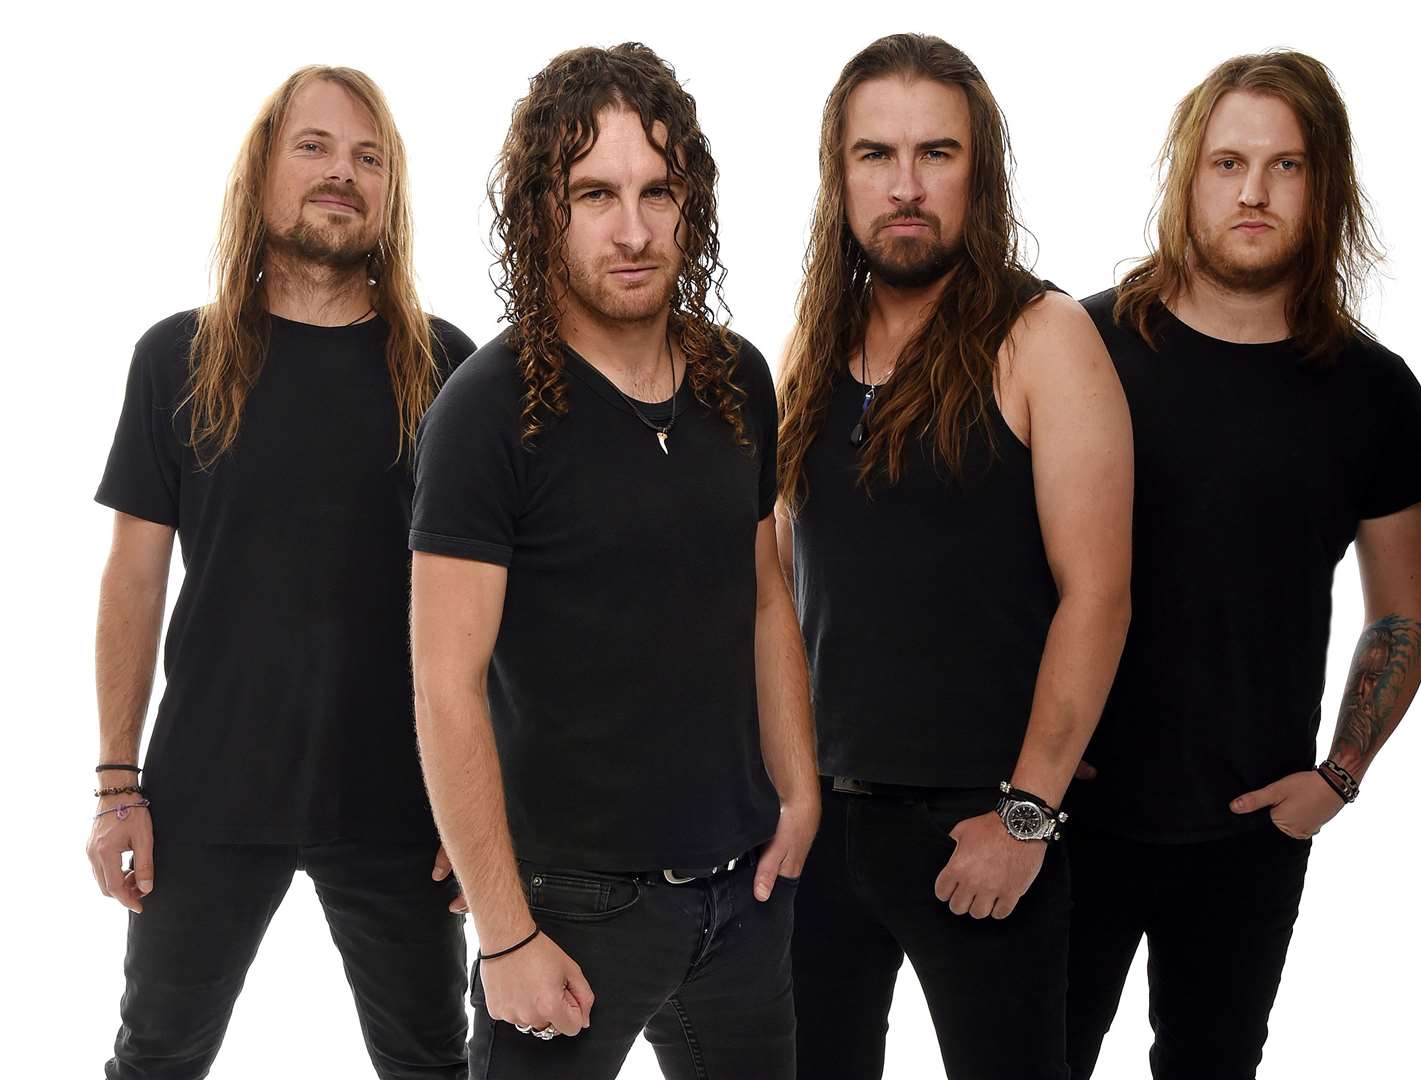 Aussies Airbourne will play on the Sunday